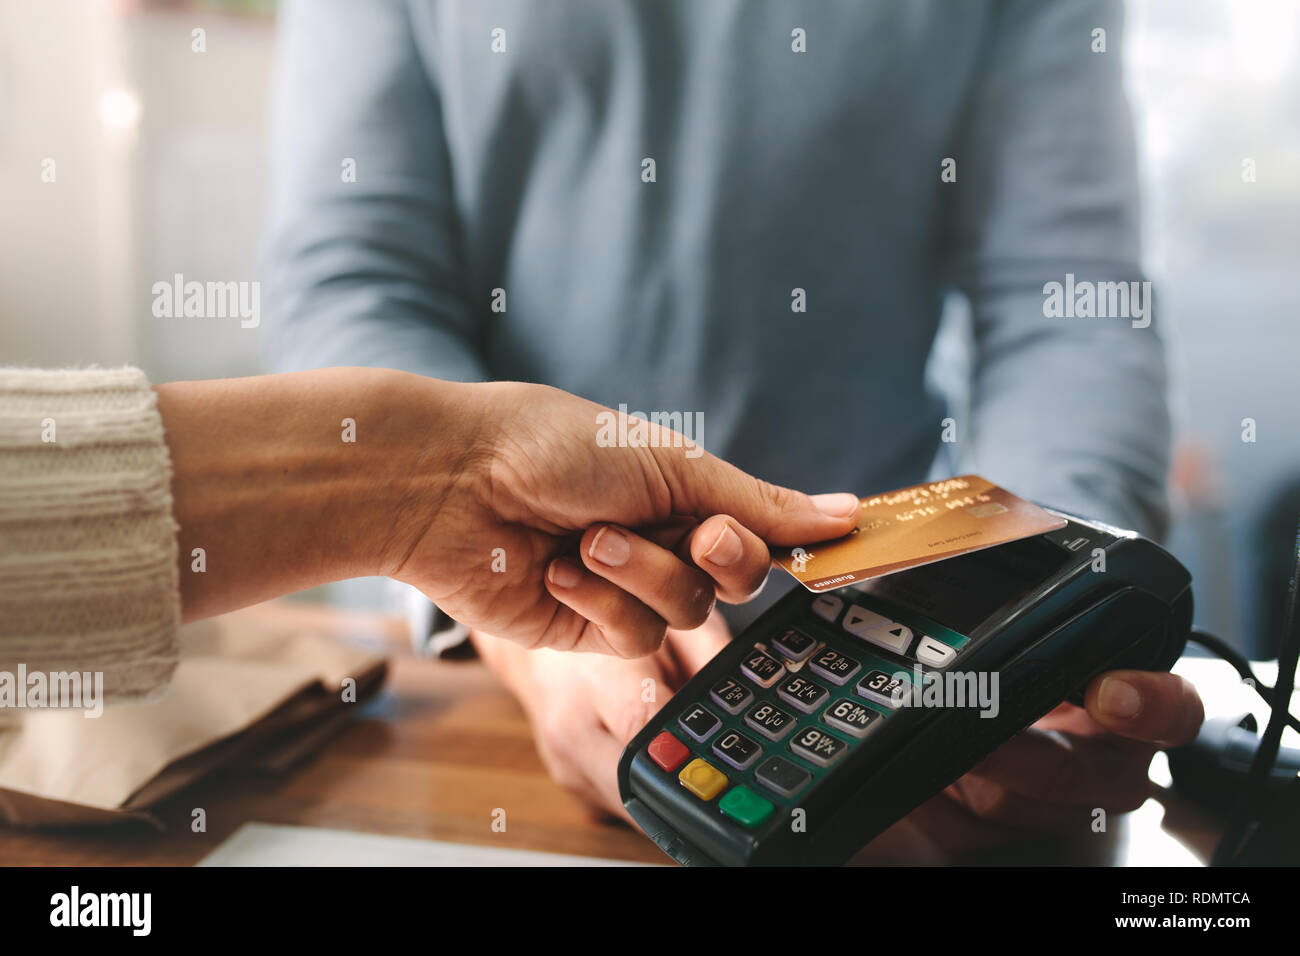 Pharmacist accepting credit card by contactless payment.  Woman purchasing products in the pharmacy. Pharmacist hands charging with credit card reader Stock Photo